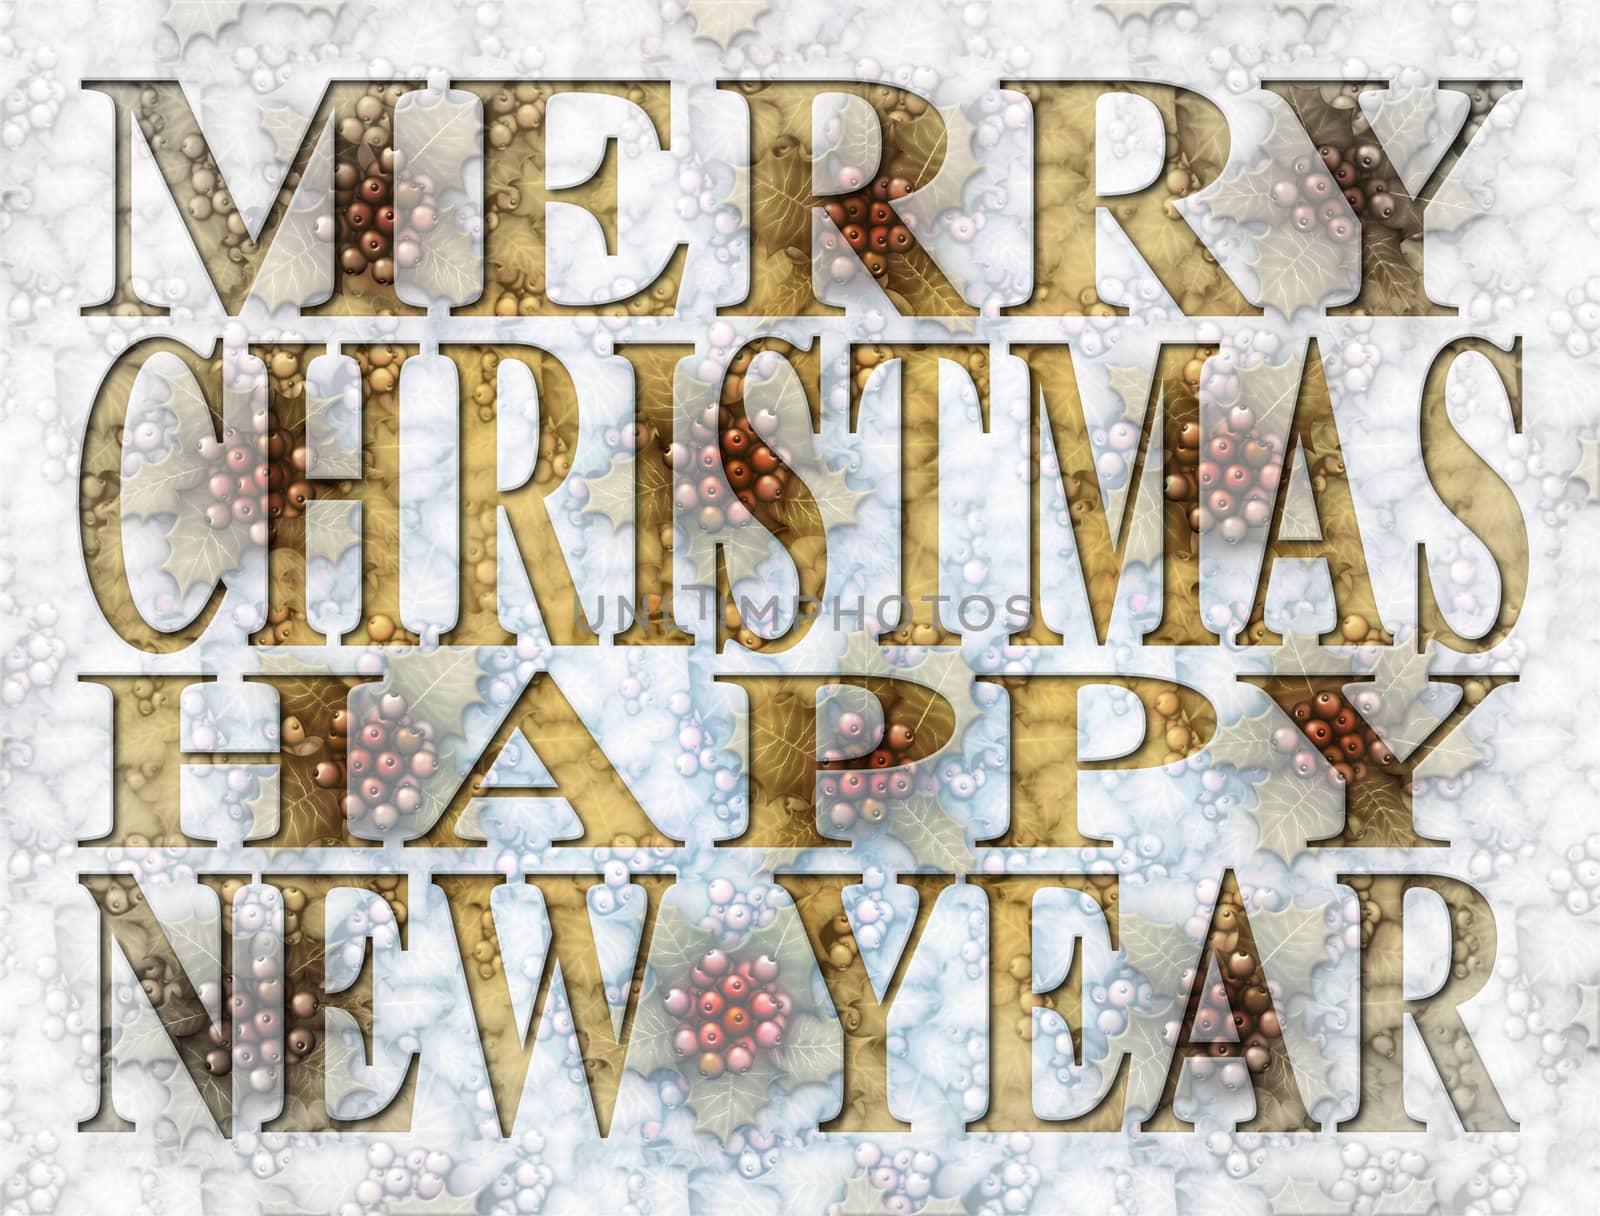 Merry Christmas Happy New Year type set with a digitally illustrated background  of holly.